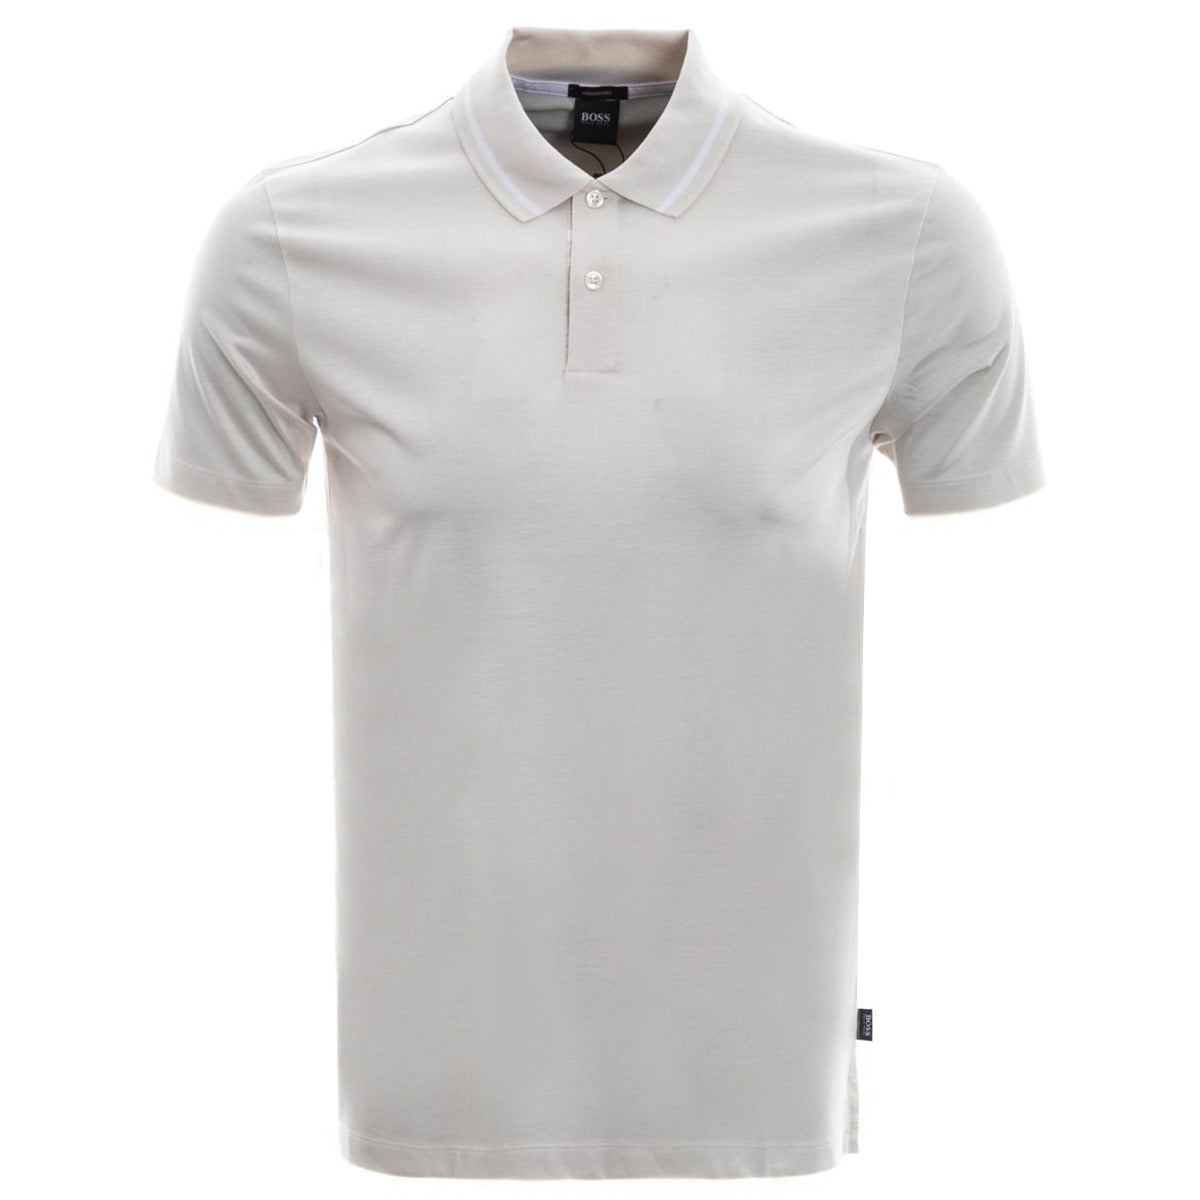 BOSS Parlay 124 Polo Shirt in Off White Main